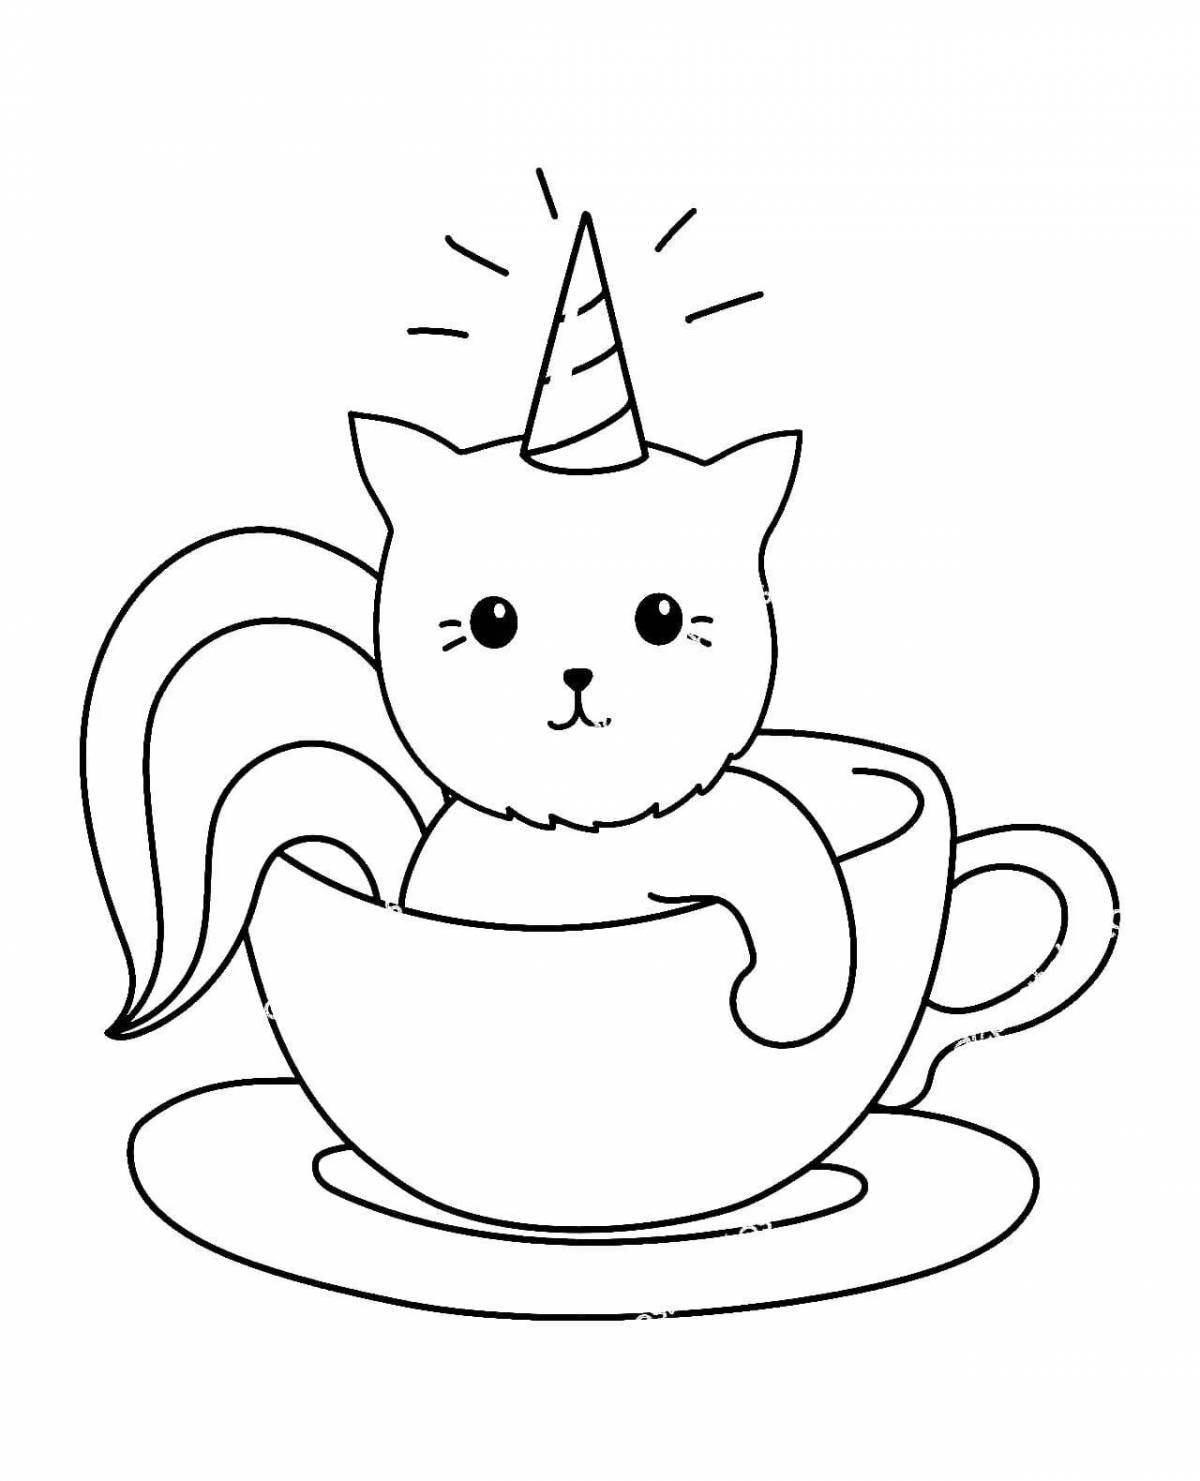 Coloring page loving cat in a mug